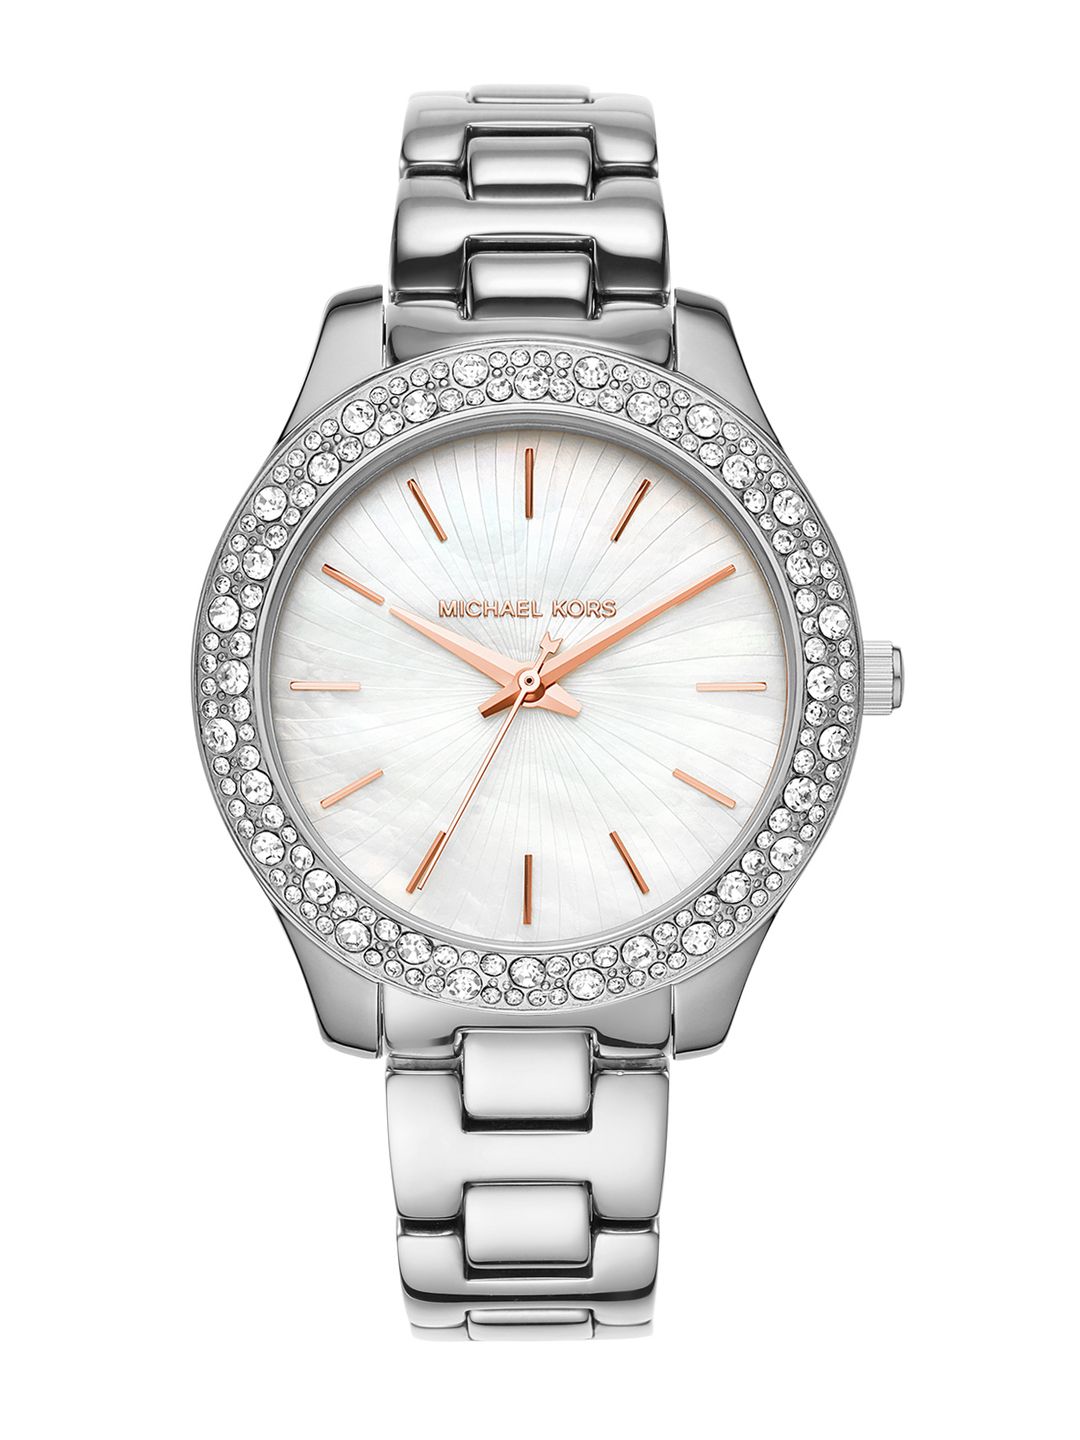 Michael Kors Women Off-White Mother of Pearl Liliane Analogue Watch MK4556 Price in India